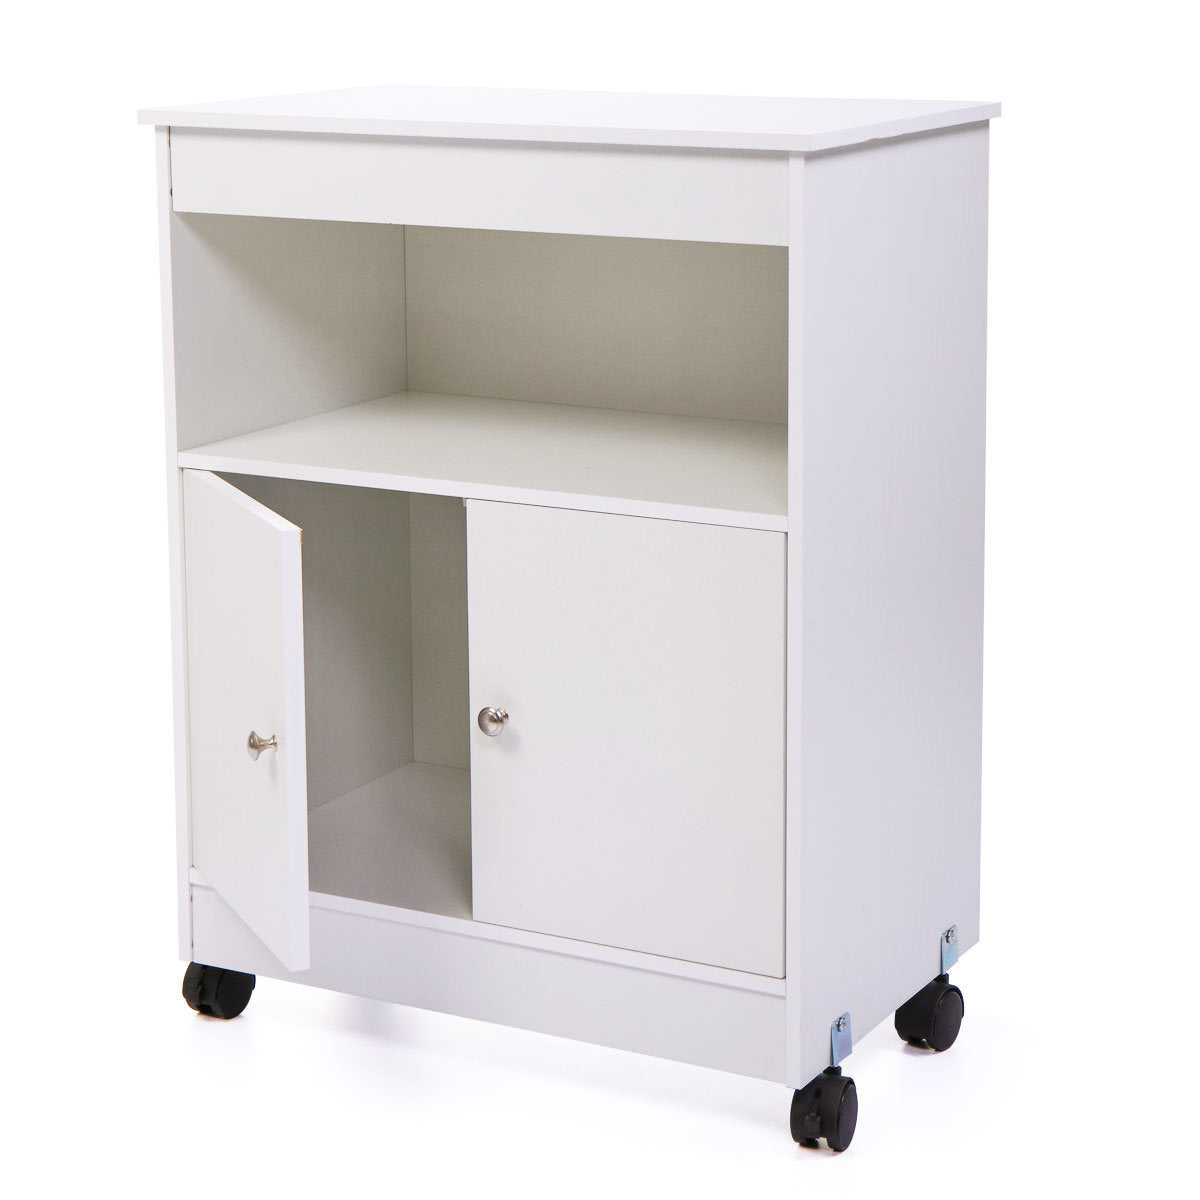 A Wood Kitchen Microwave Cabinet Cart with 4 Universal Wheels and Roomy Inner Space for Home Use, White in a kitchen.